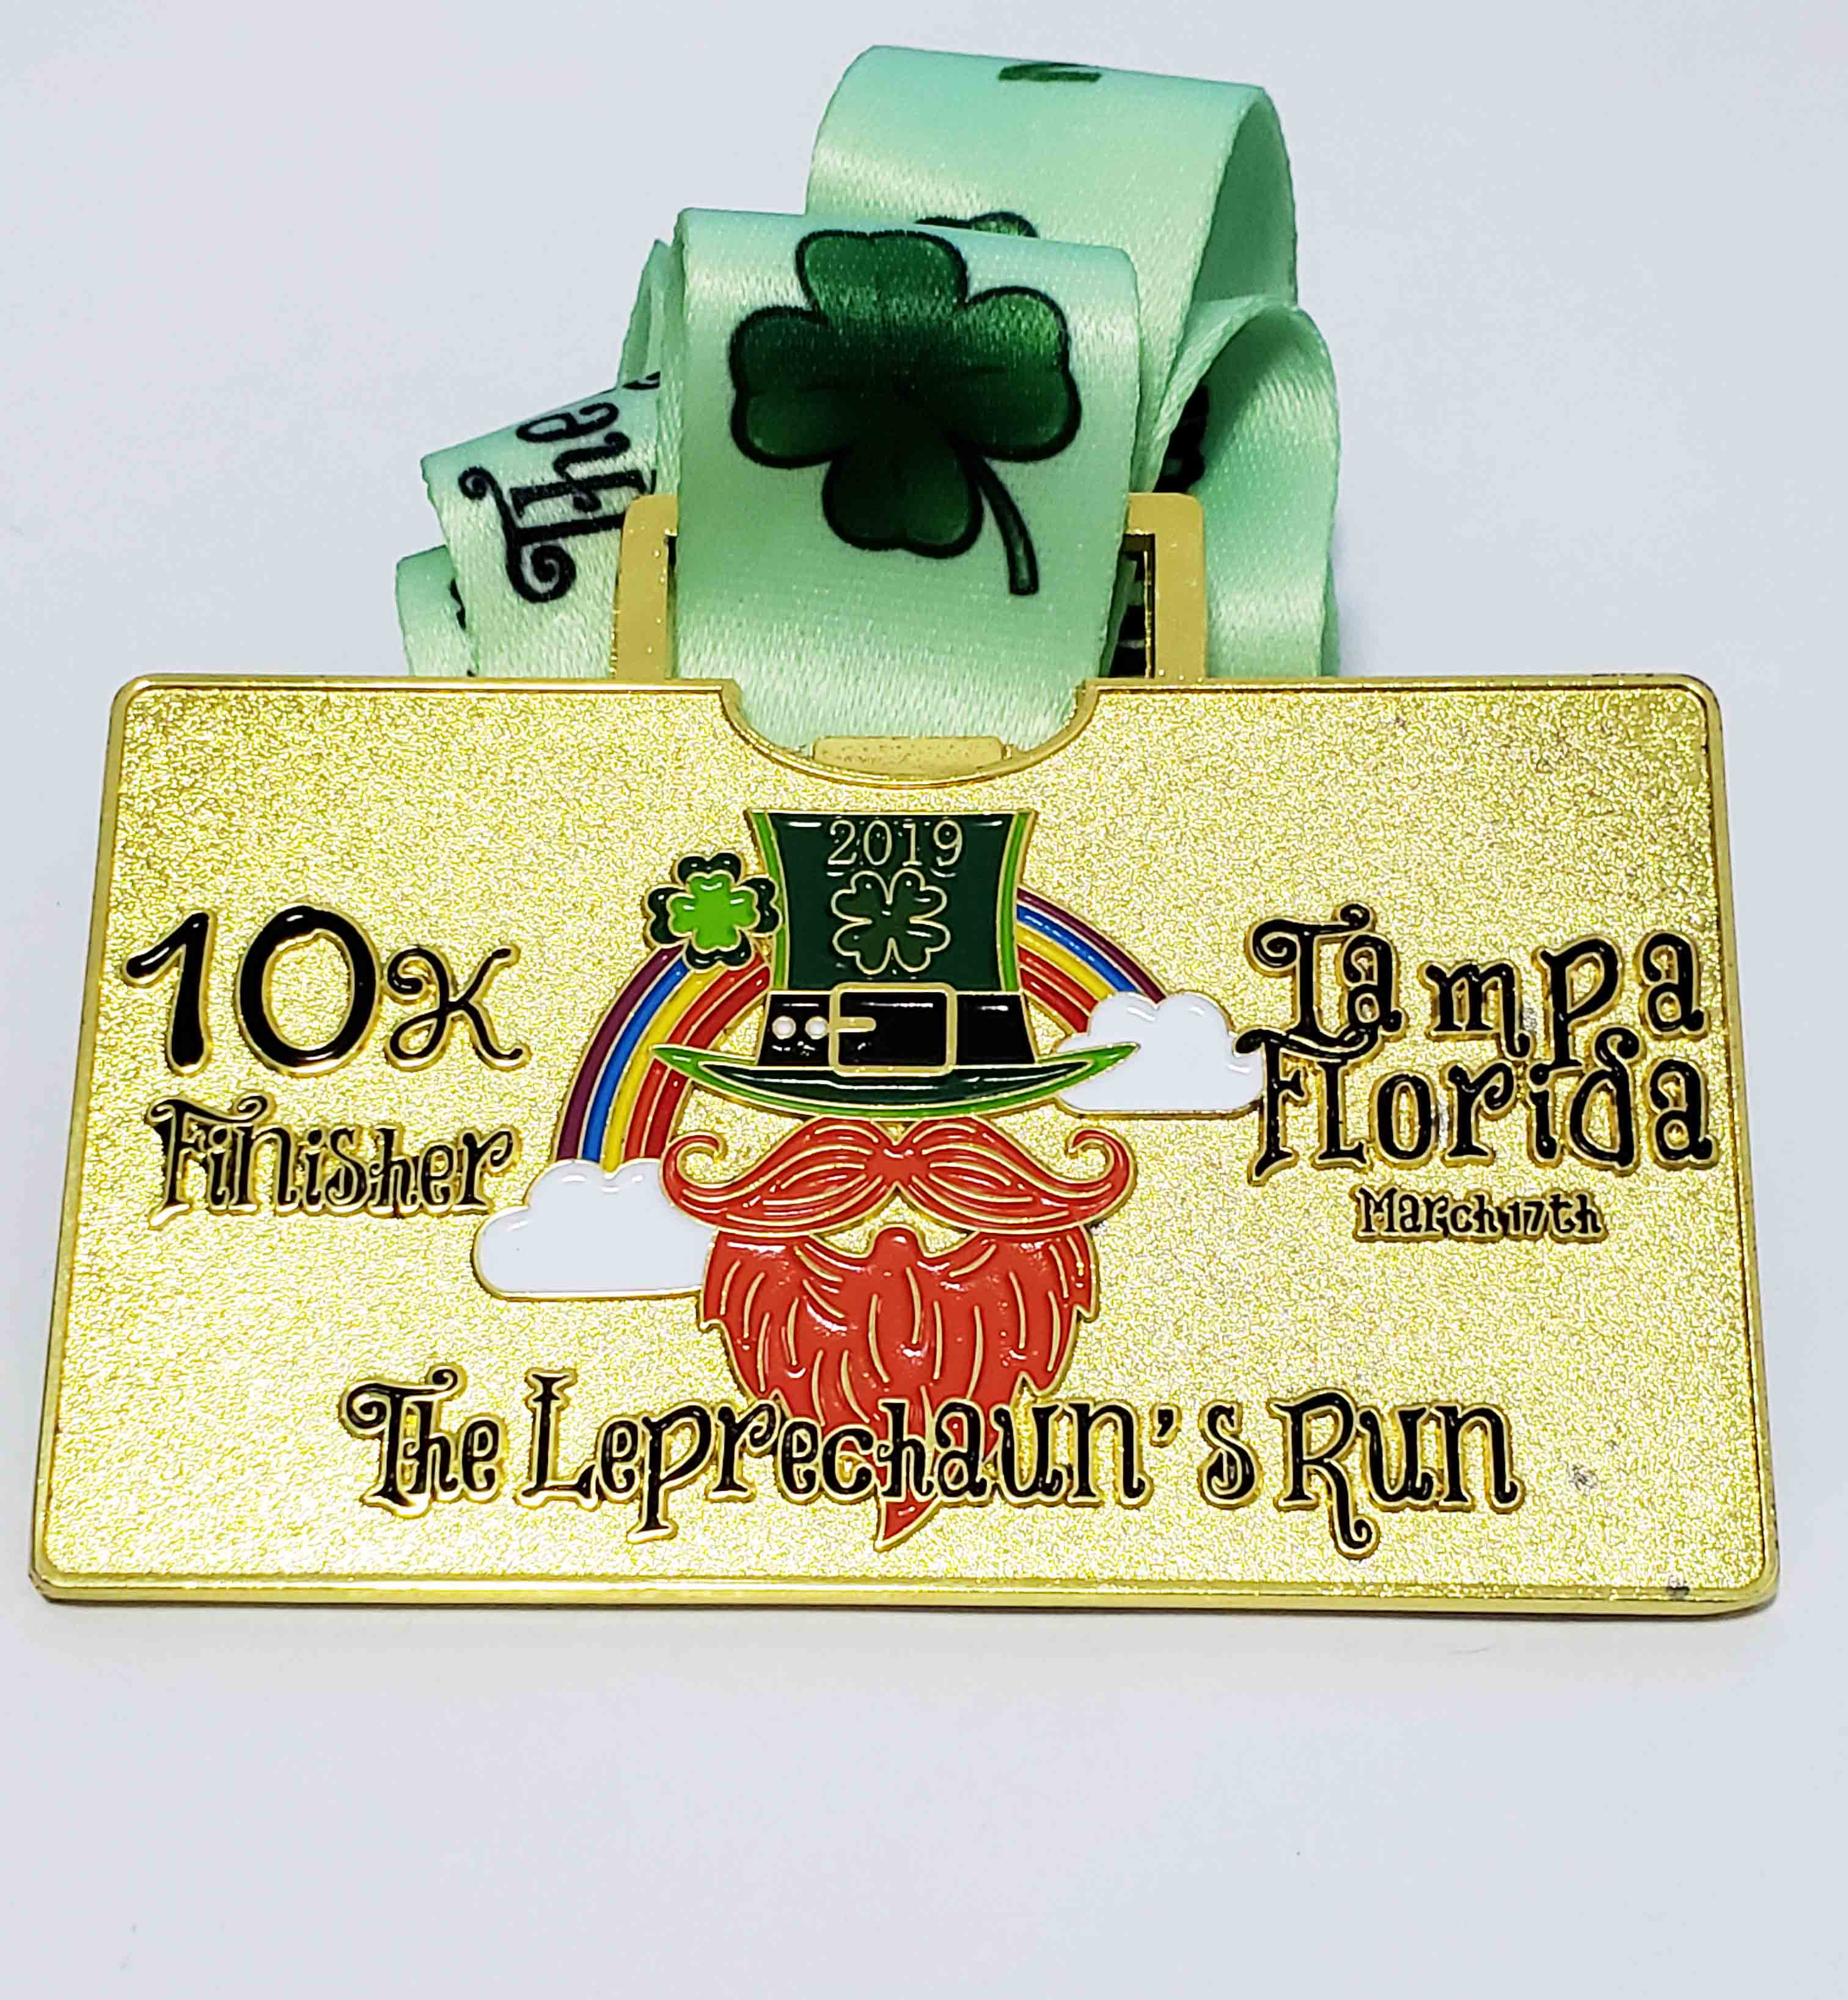 10K running medal with gold plating